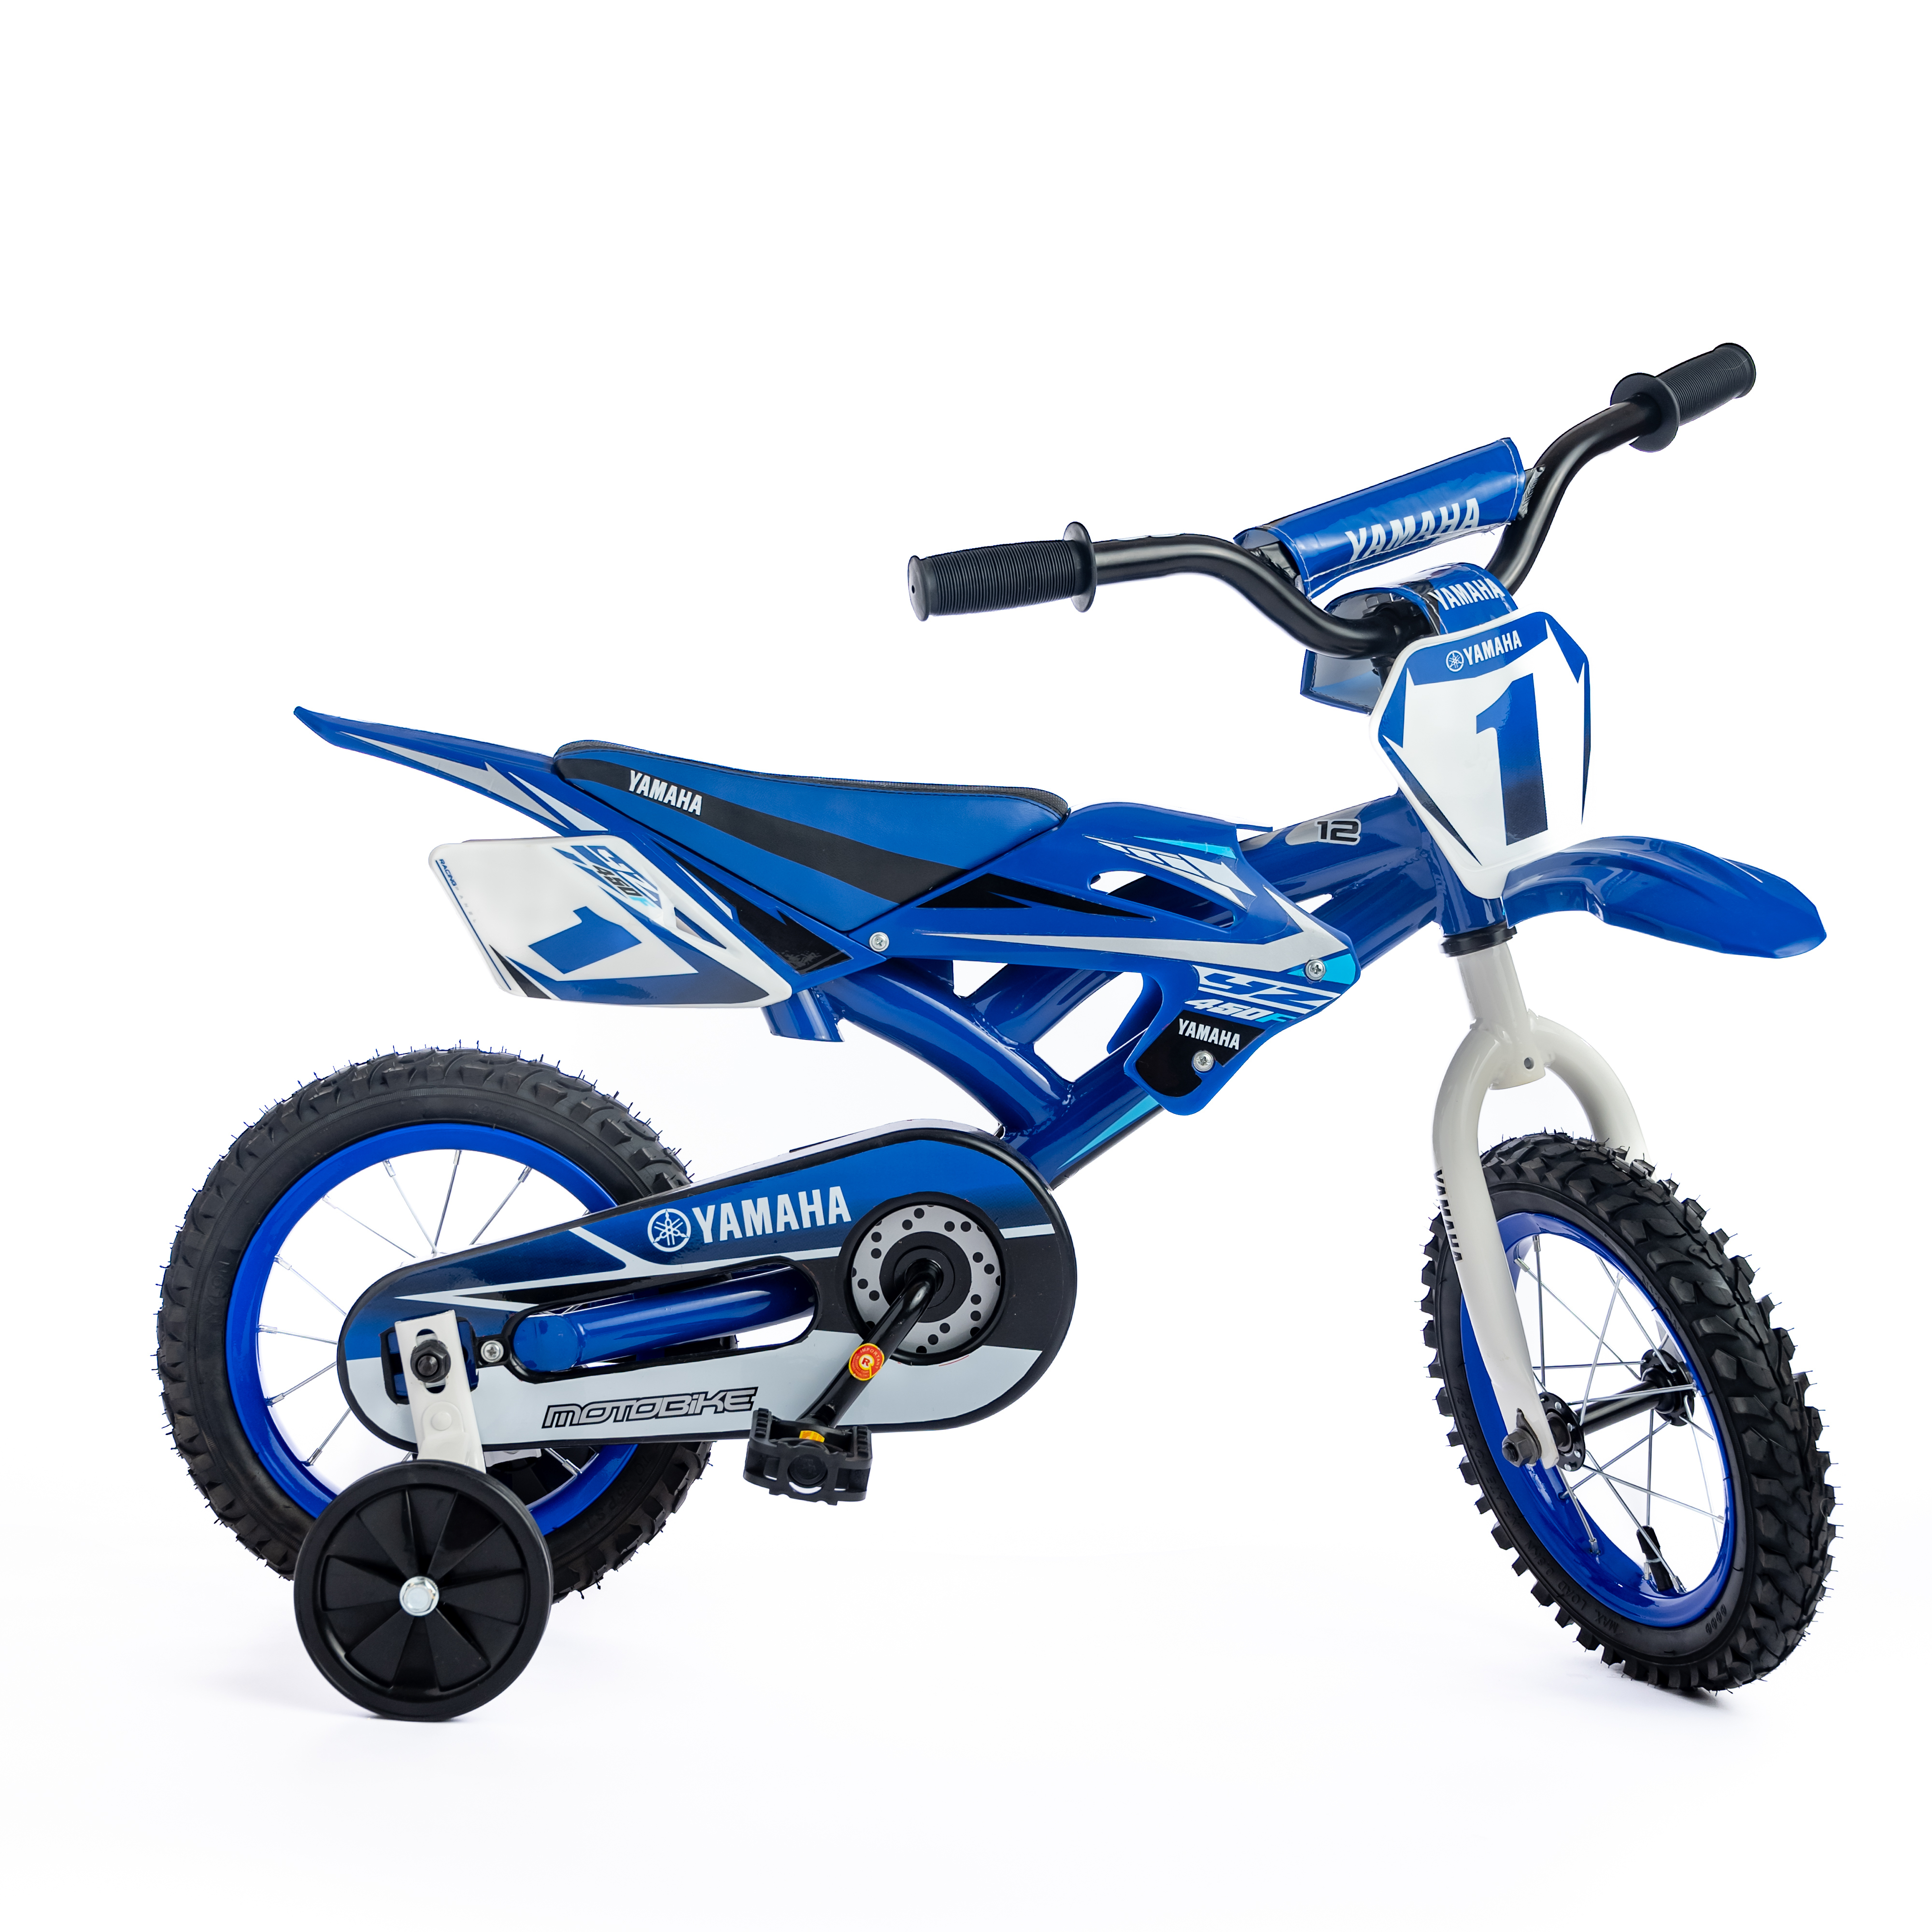 12in Yamaha Motobike for children age 2 to 4 Years old - image 3 of 11